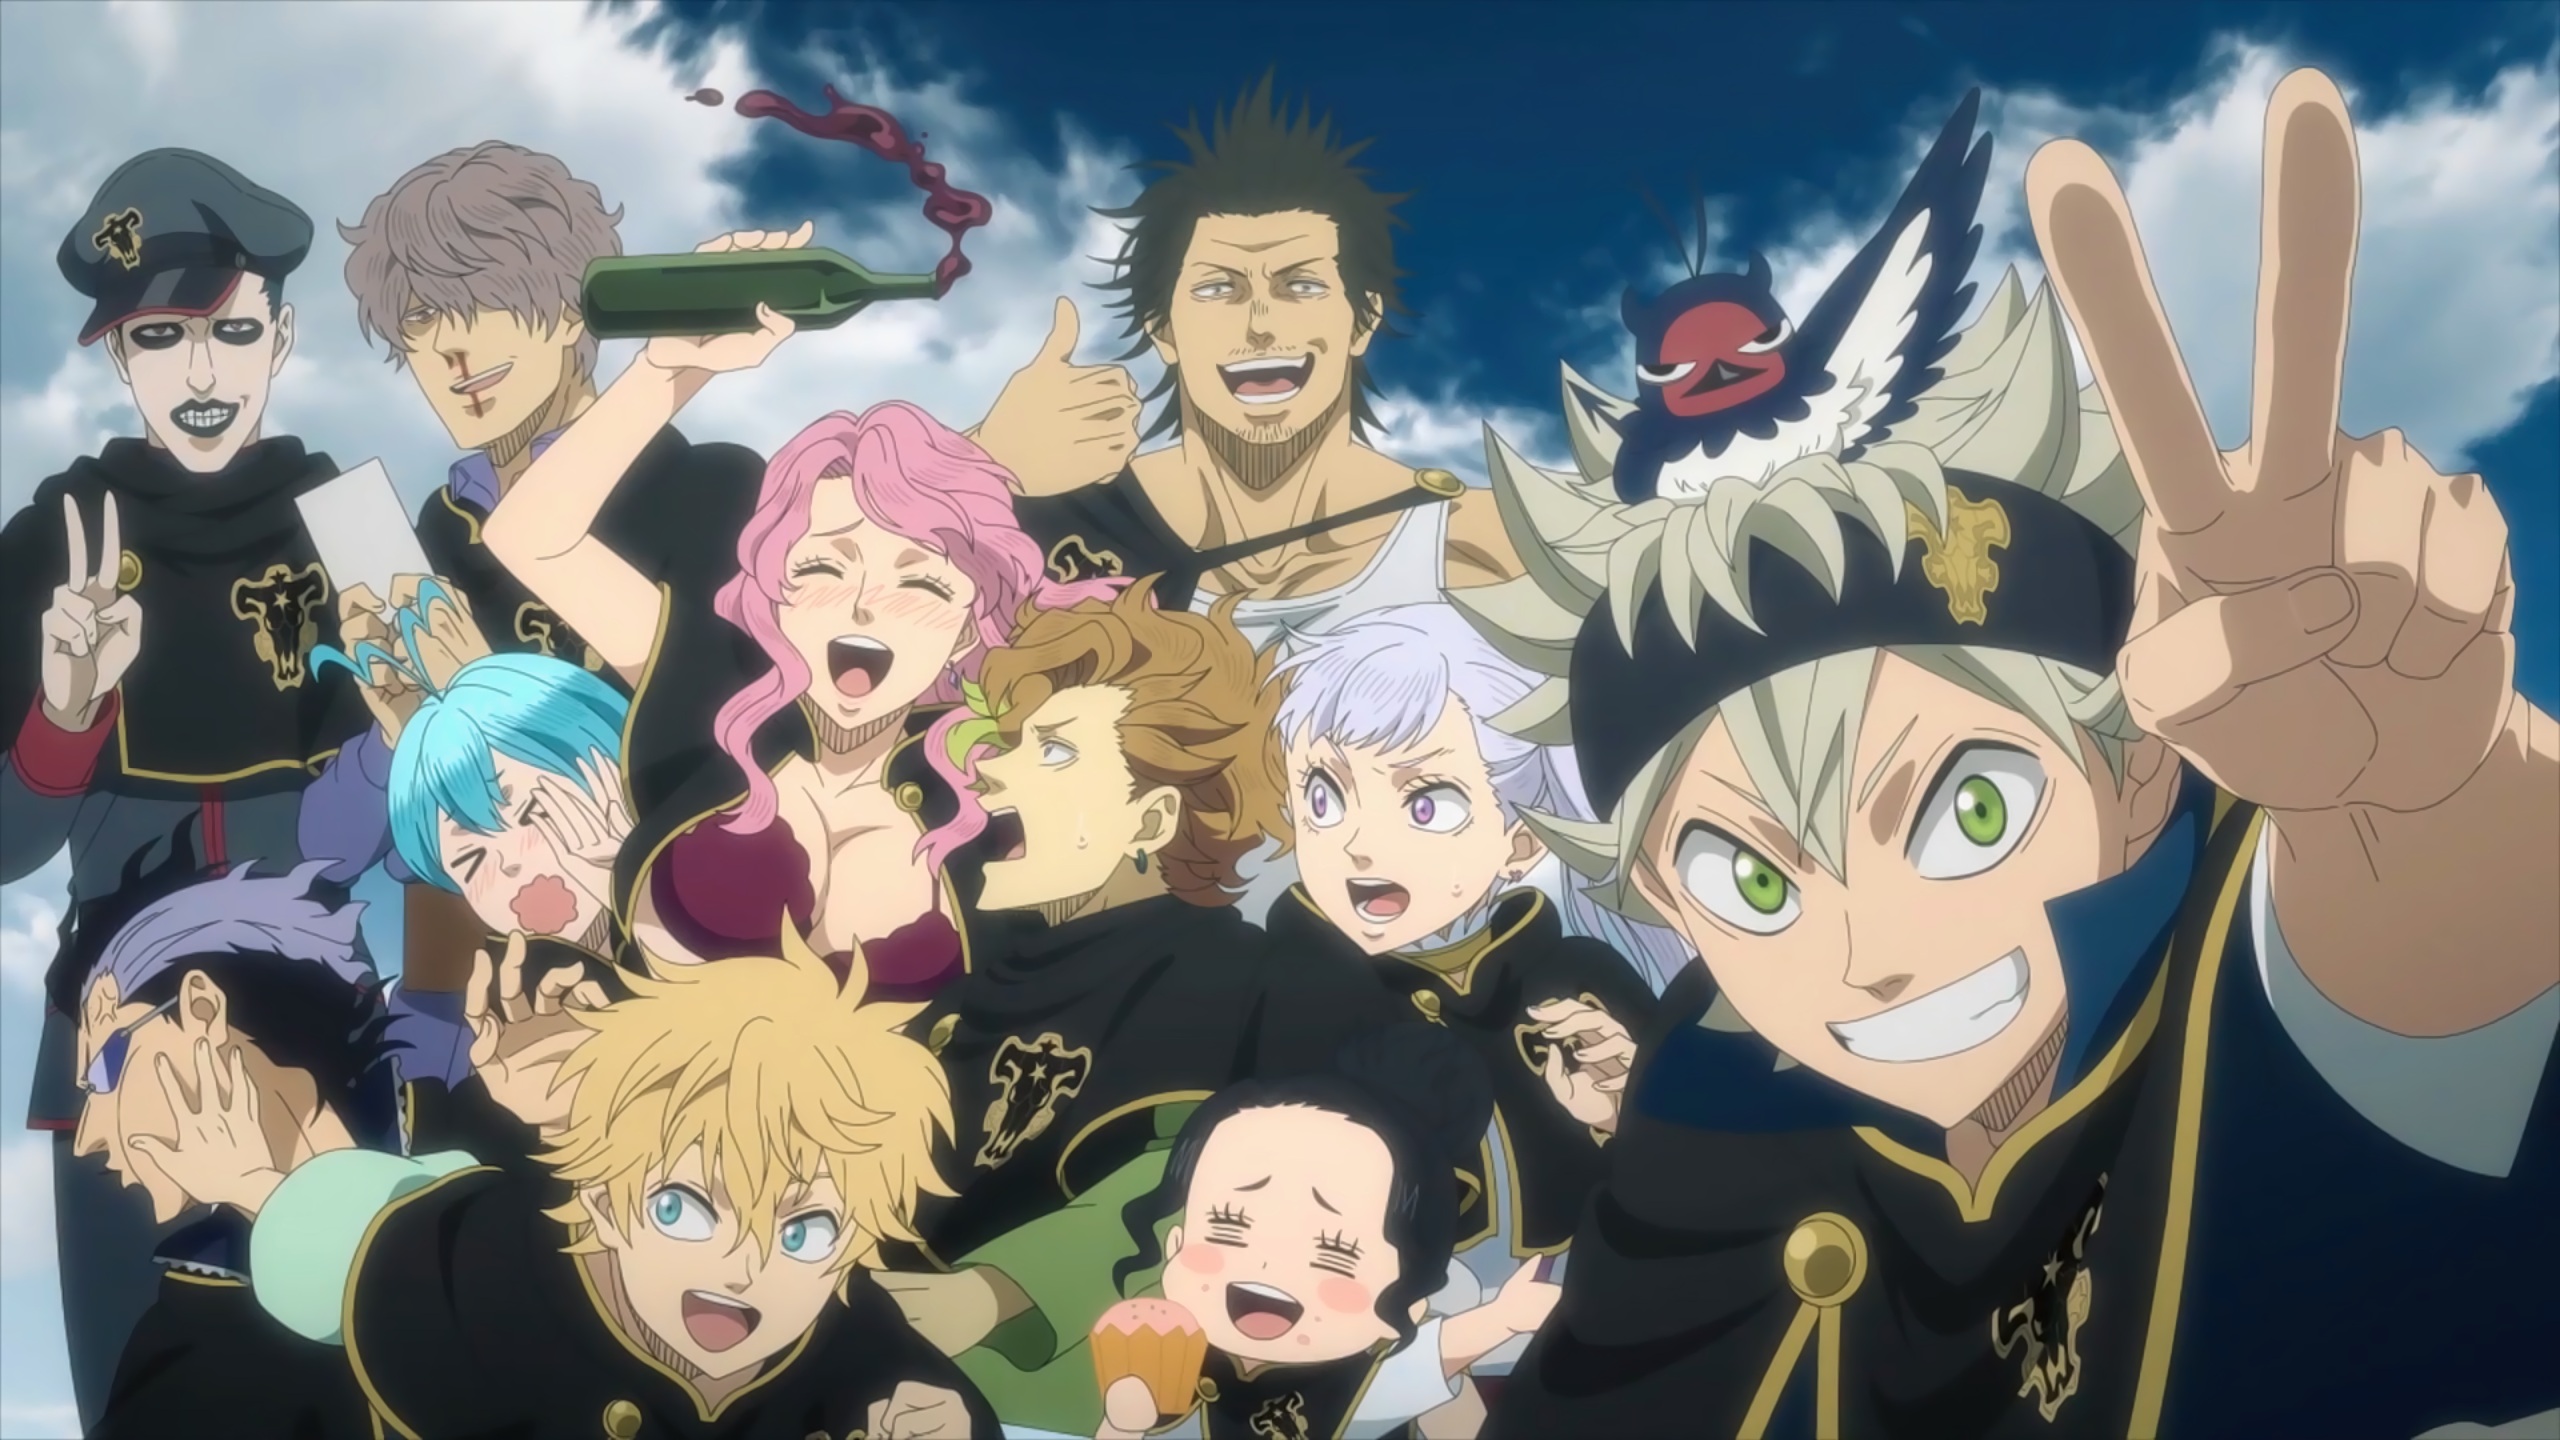 Asta Black Clover Charmy Pappitson Finral Roulacase Gauche Adlai Luck Voltia Magna Swing Noelle Silv 2560x1440